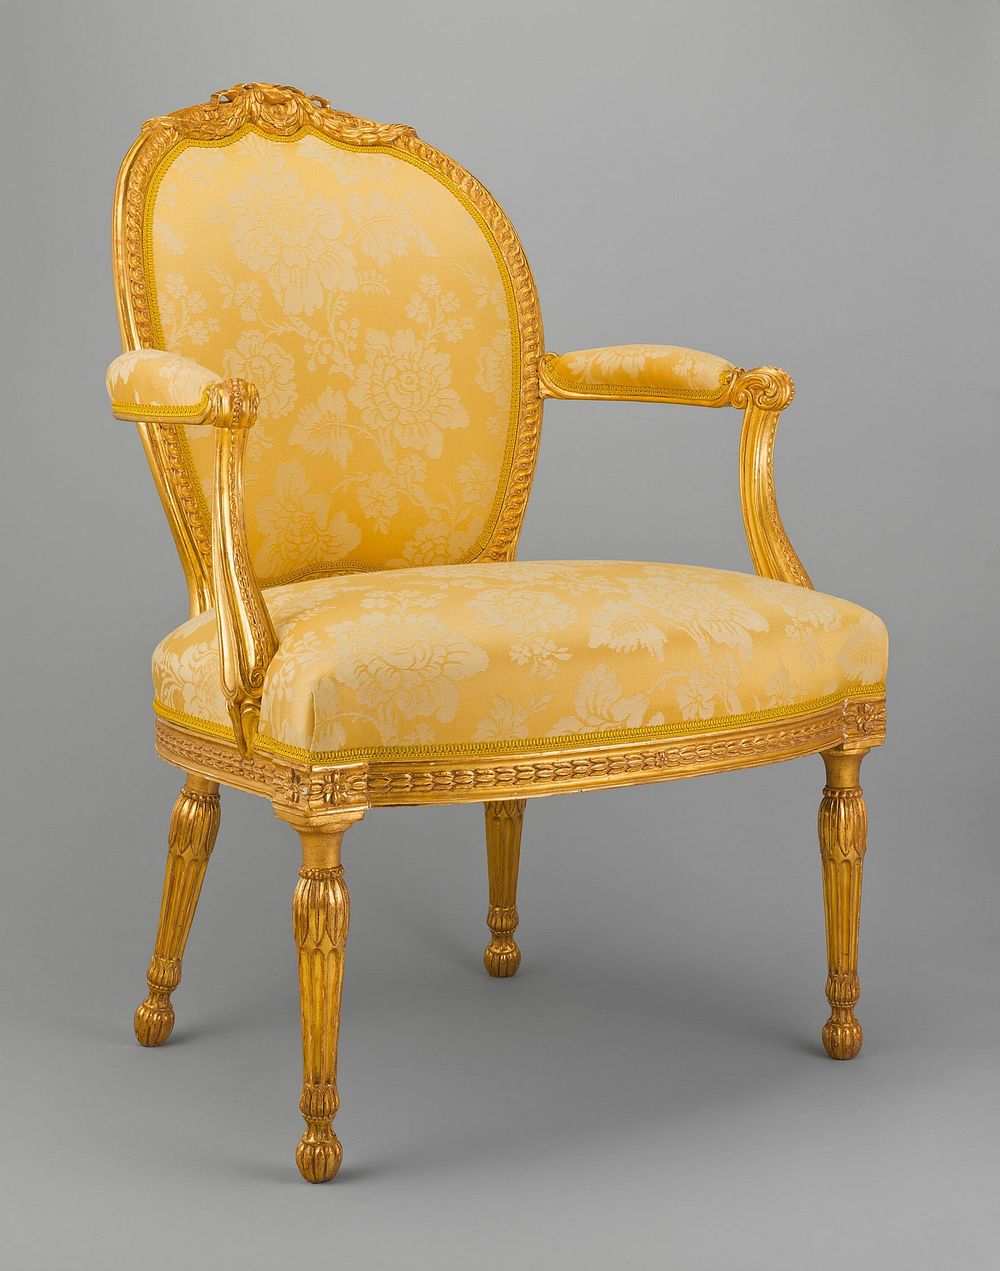 Armchair by Thomas Chippendale, I